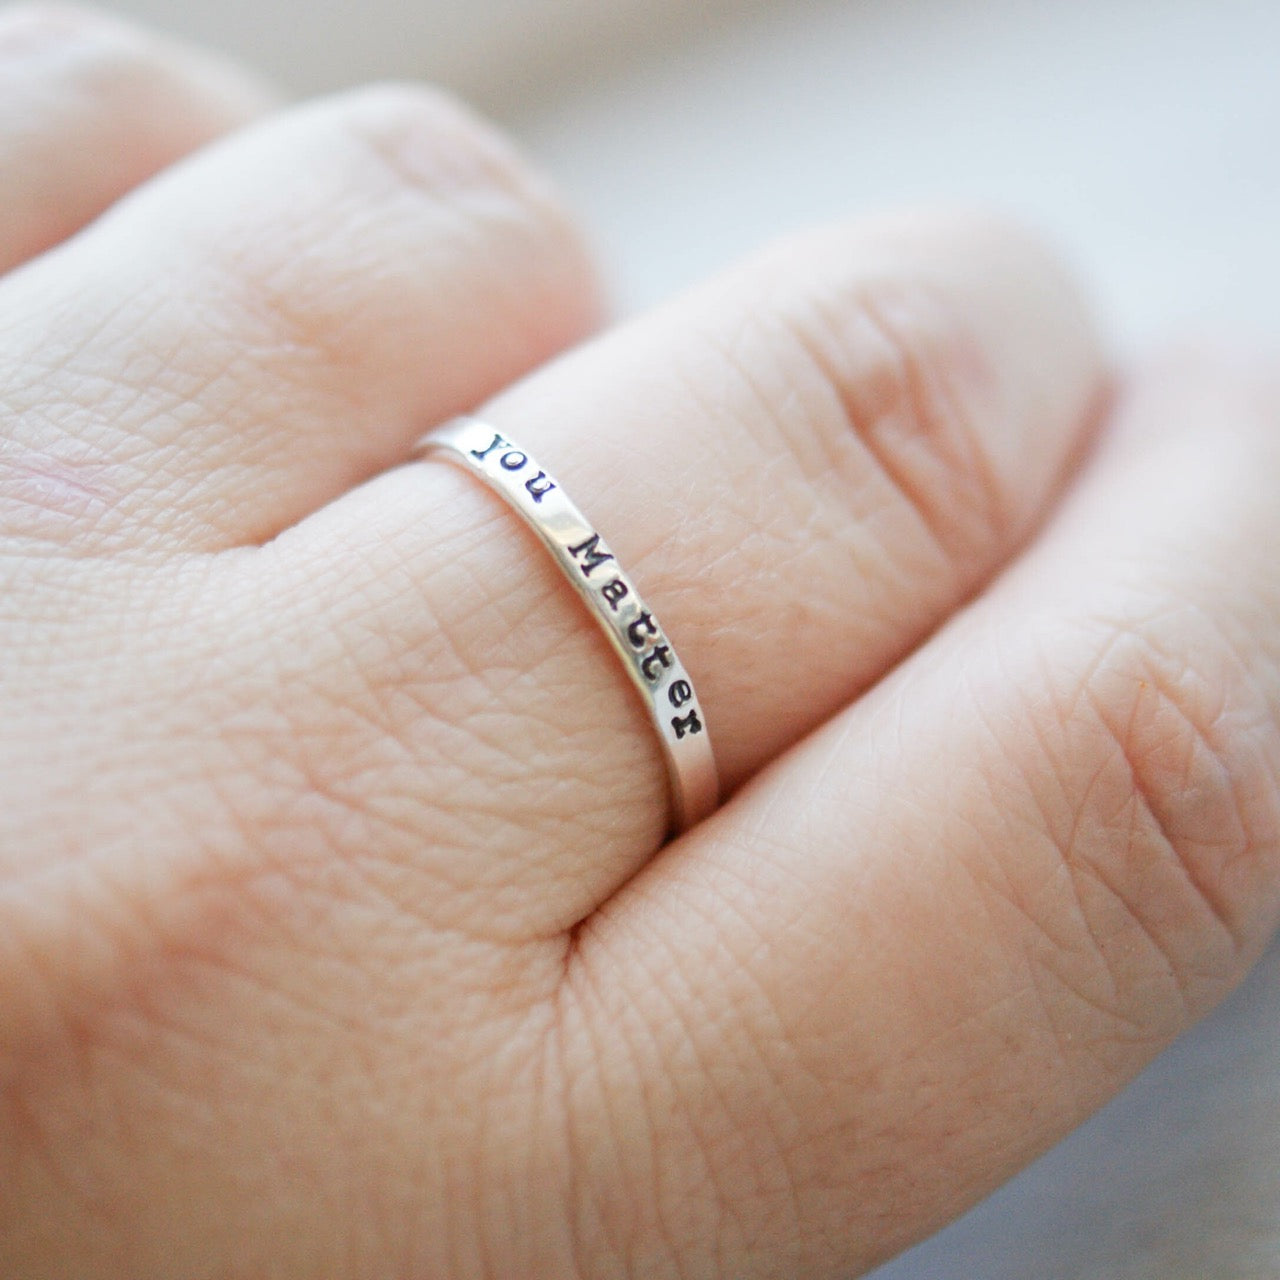 Image of Sterling Silver Ring stamped with You Matter on hand